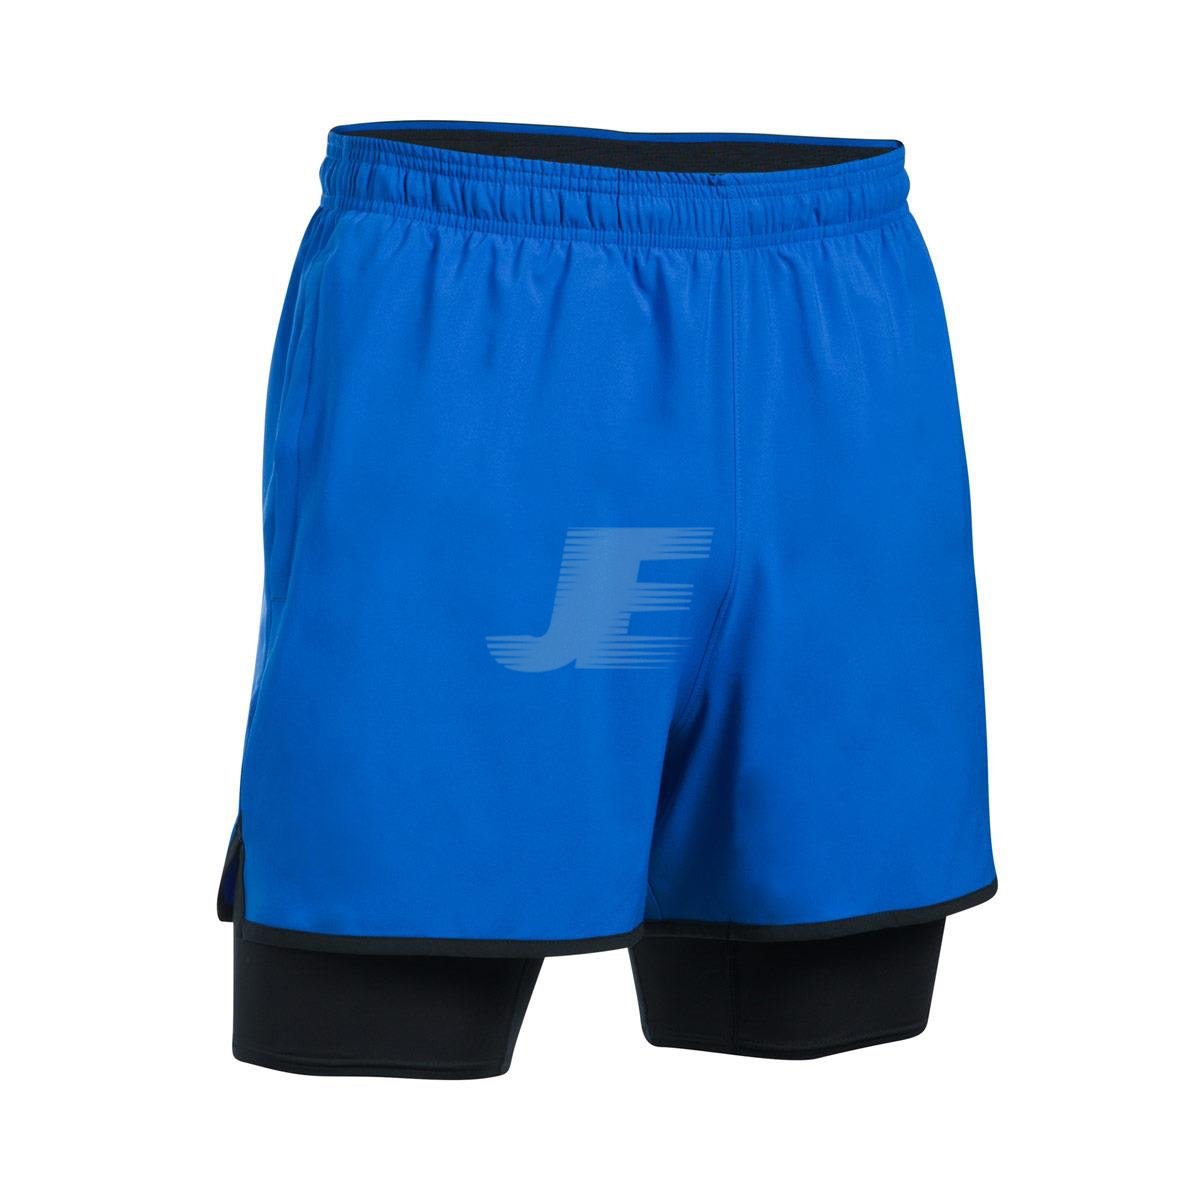 Mens Gym Training Interlock Shorts with Lined Compression Shorts